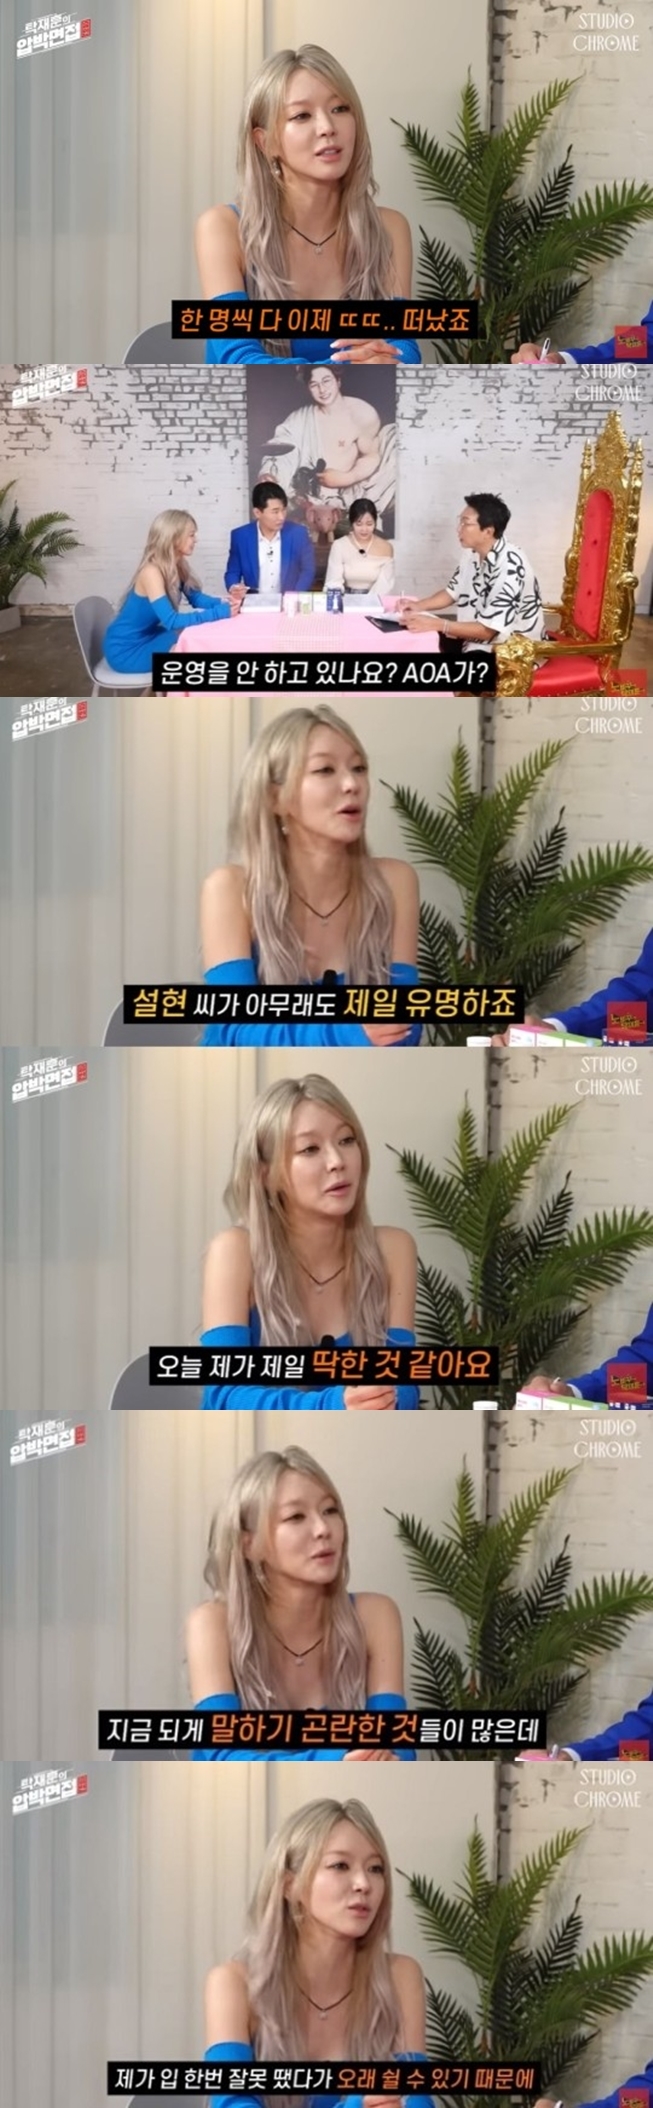 Park Choa, a broadcaster, cited himself as the worst person among AOA members.Park Choa appeared as a guest on the channel NOPAKUTak Jae-hun released on August 28th.On this day, Park Choa drew attention by saying, I was the first to leave, and I support all my sisters.When asked by Tak Jae-hun, Is the culprit the culprit himself or not? Then why did he do it? I quit one by one and quit one by one, but now AOA is not operating, he answered by nodding his head.Asked about the best person among the AOA members, Park Choa replied, Seolhyun is the most famous.Then Tak Jae-hun asked, Who is the most pitiful person? I think I am the most pitiful today. There are many things that I can not say right now, but I do not know what to do with this hardship and adversity.I can take a long time after I make a mistake in my mouth. 